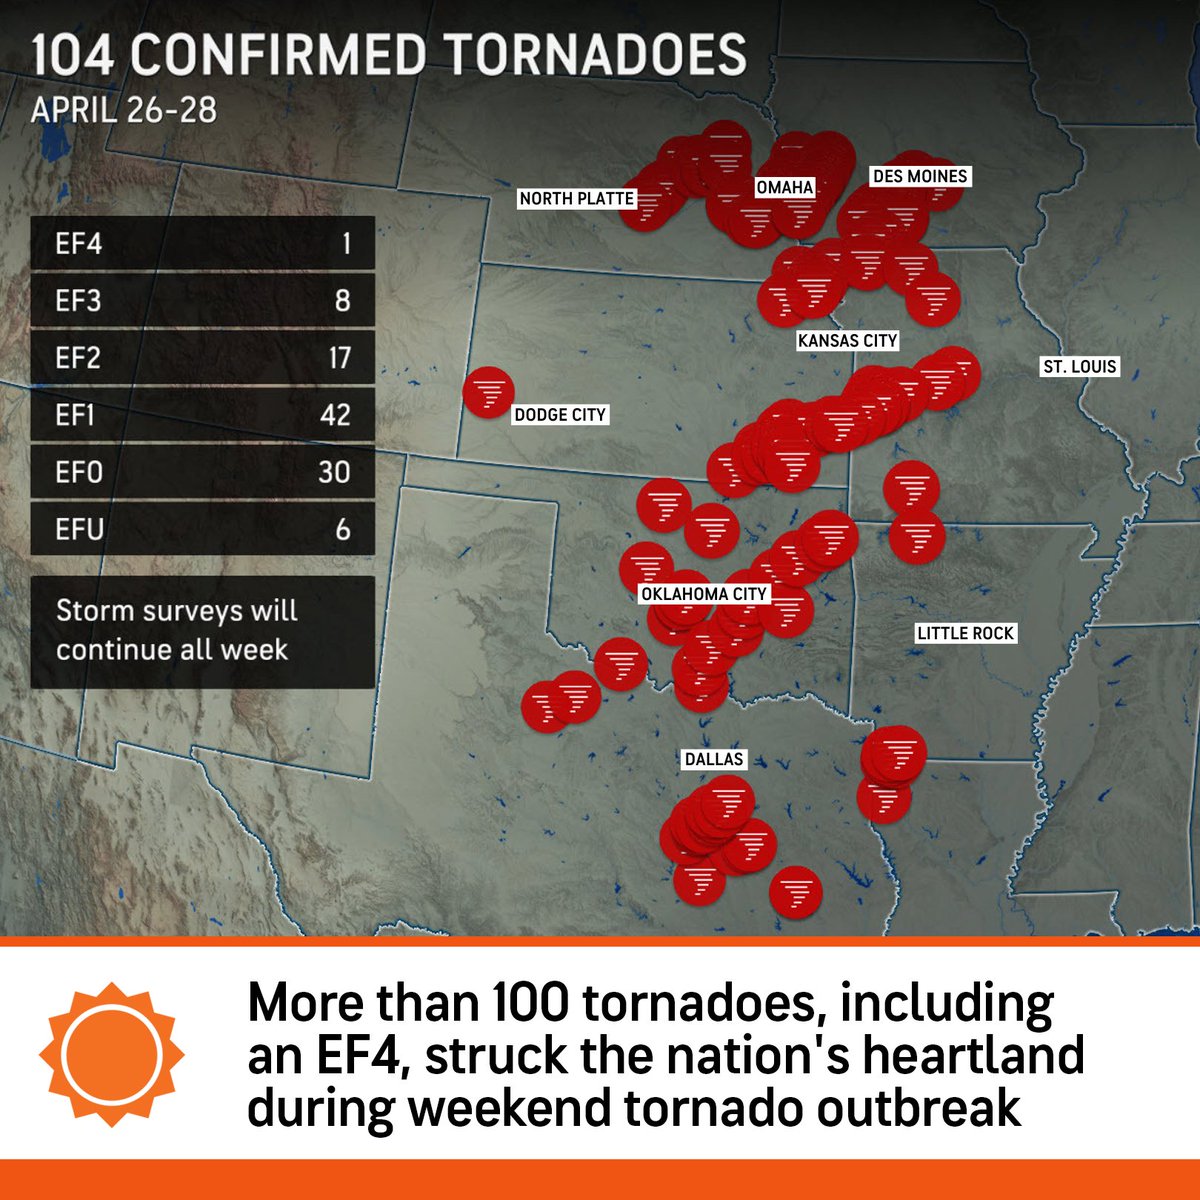 The worst of the storms surveyed so far was a tornado in Marietta, Oklahoma, rated EF4 with winds as high as 170 mph and a track of 27 miles. bit.ly/3WhiCzr